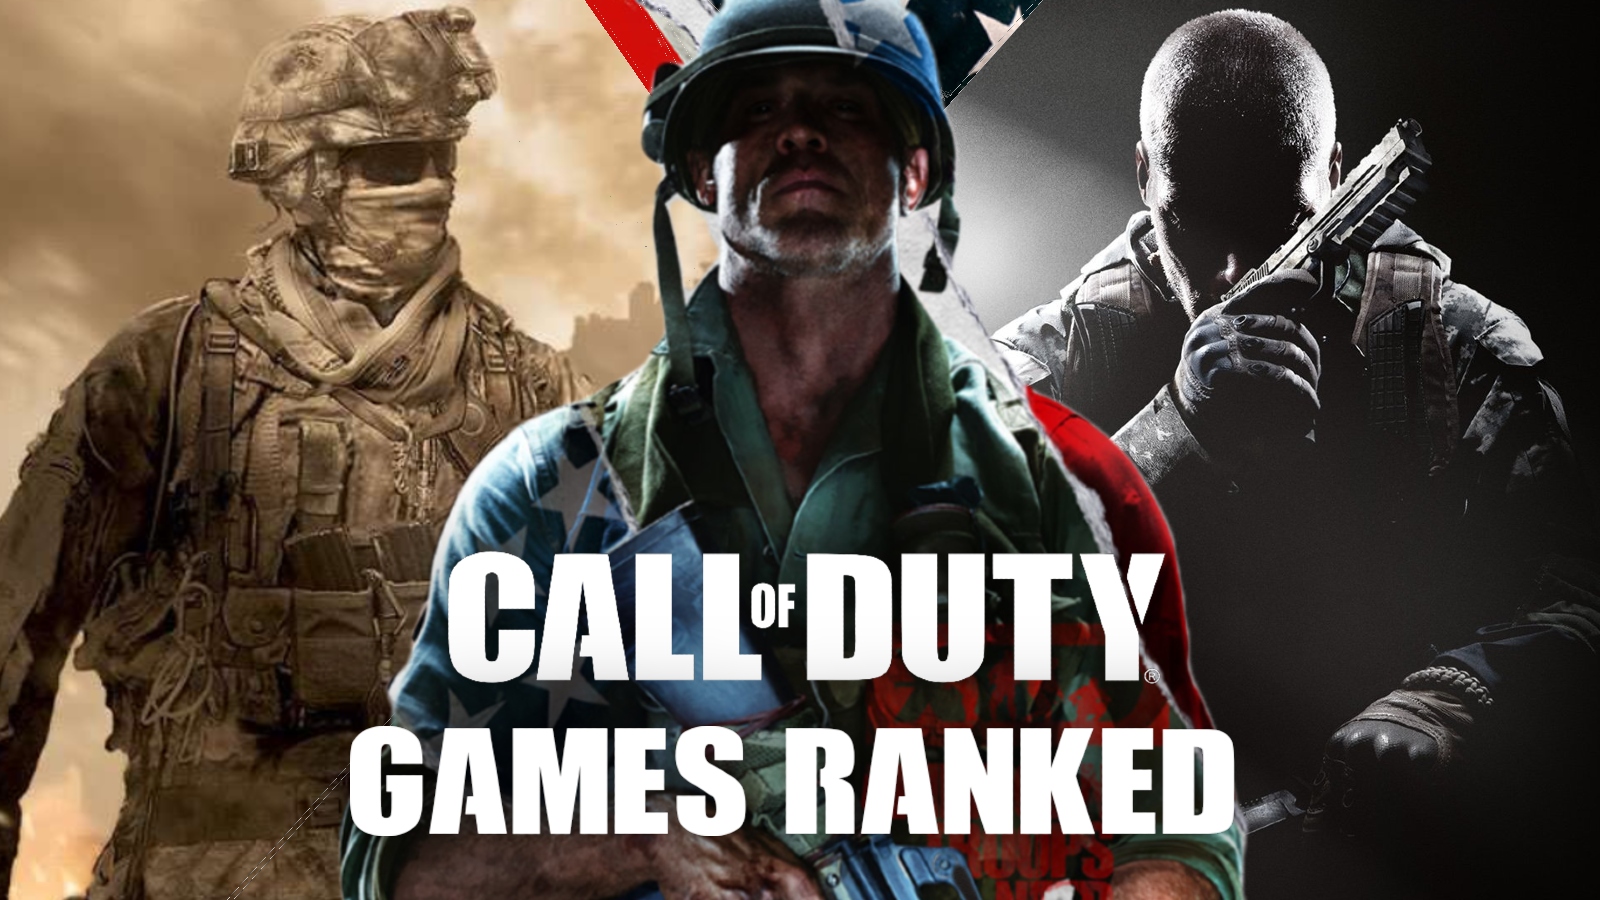 Bitterhed Observatory forfriskende The 10 best Call of Duty games of all time – ranked - Dexerto